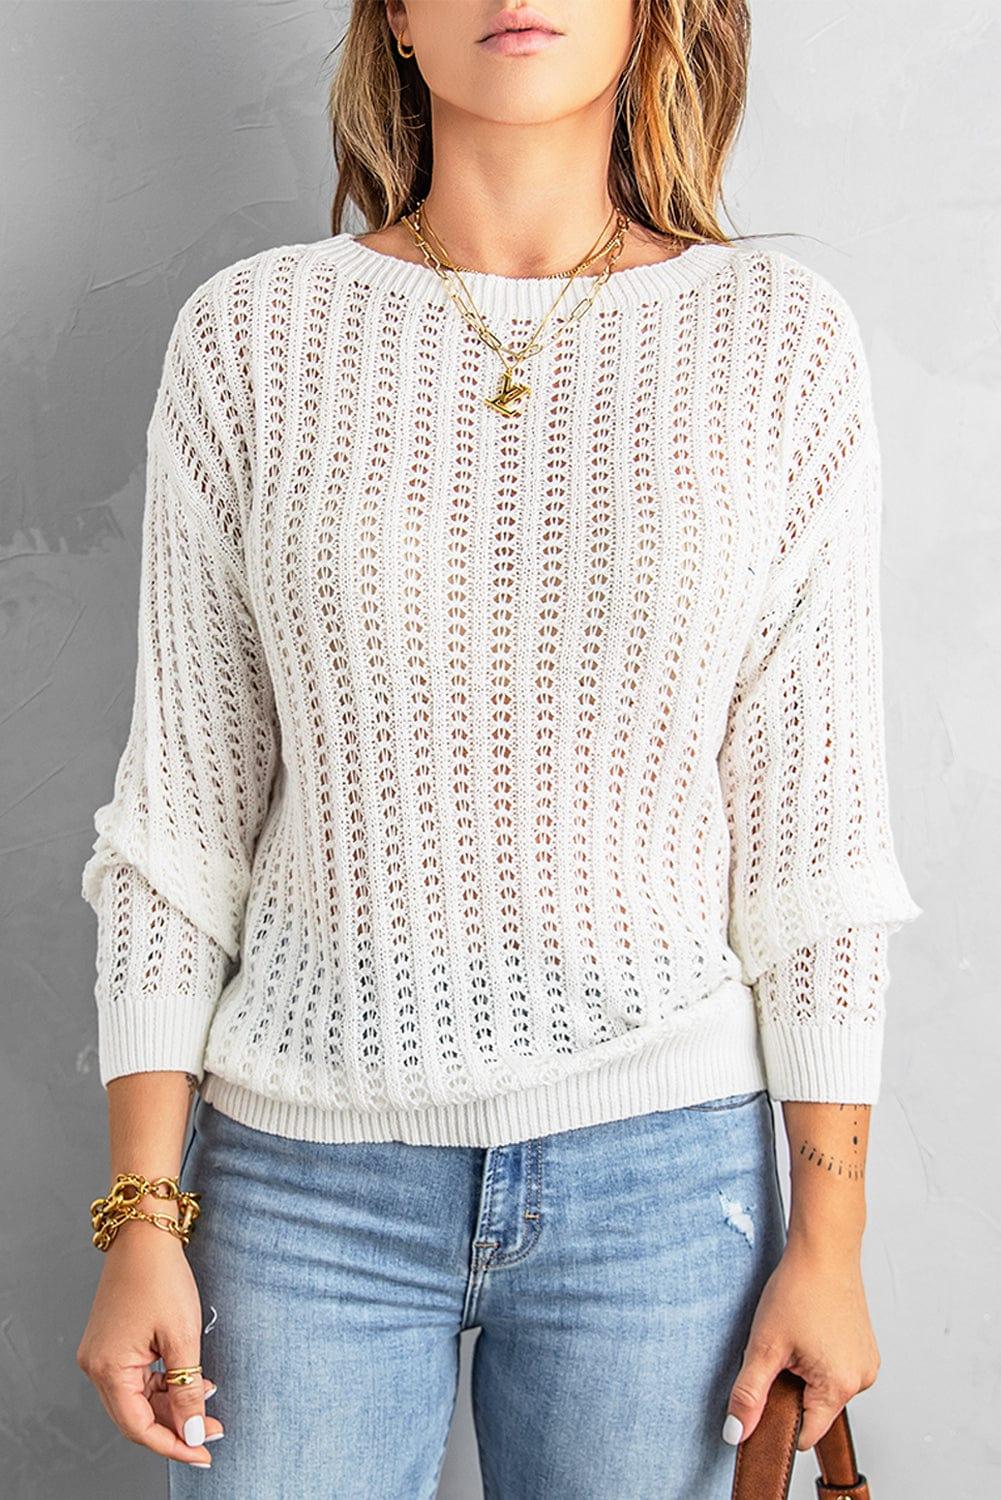 SAVLUXE Shirts & Tops Lady's Dropped Shoulder Openwork Sweater